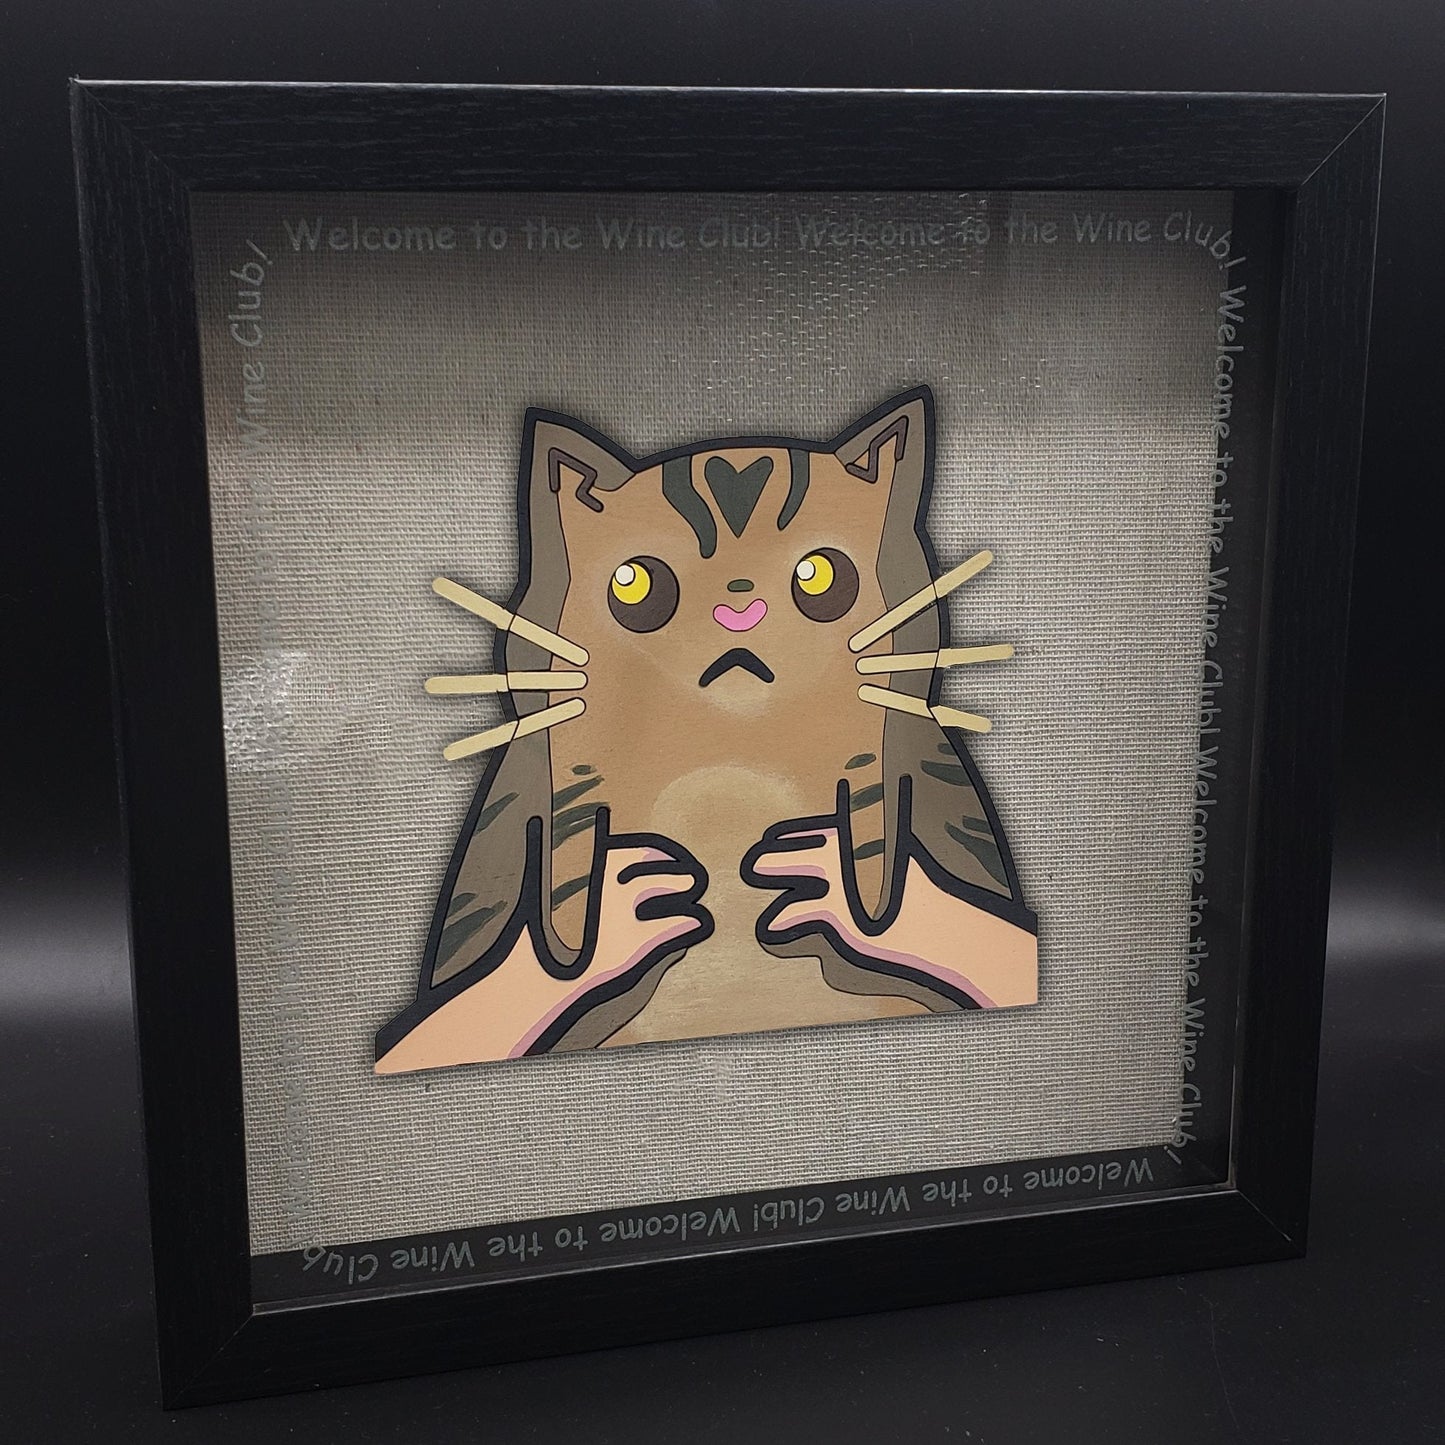 Emmy- Wooden Emote- tatrWave  **Permanent Collection** (Streamer Purchase)